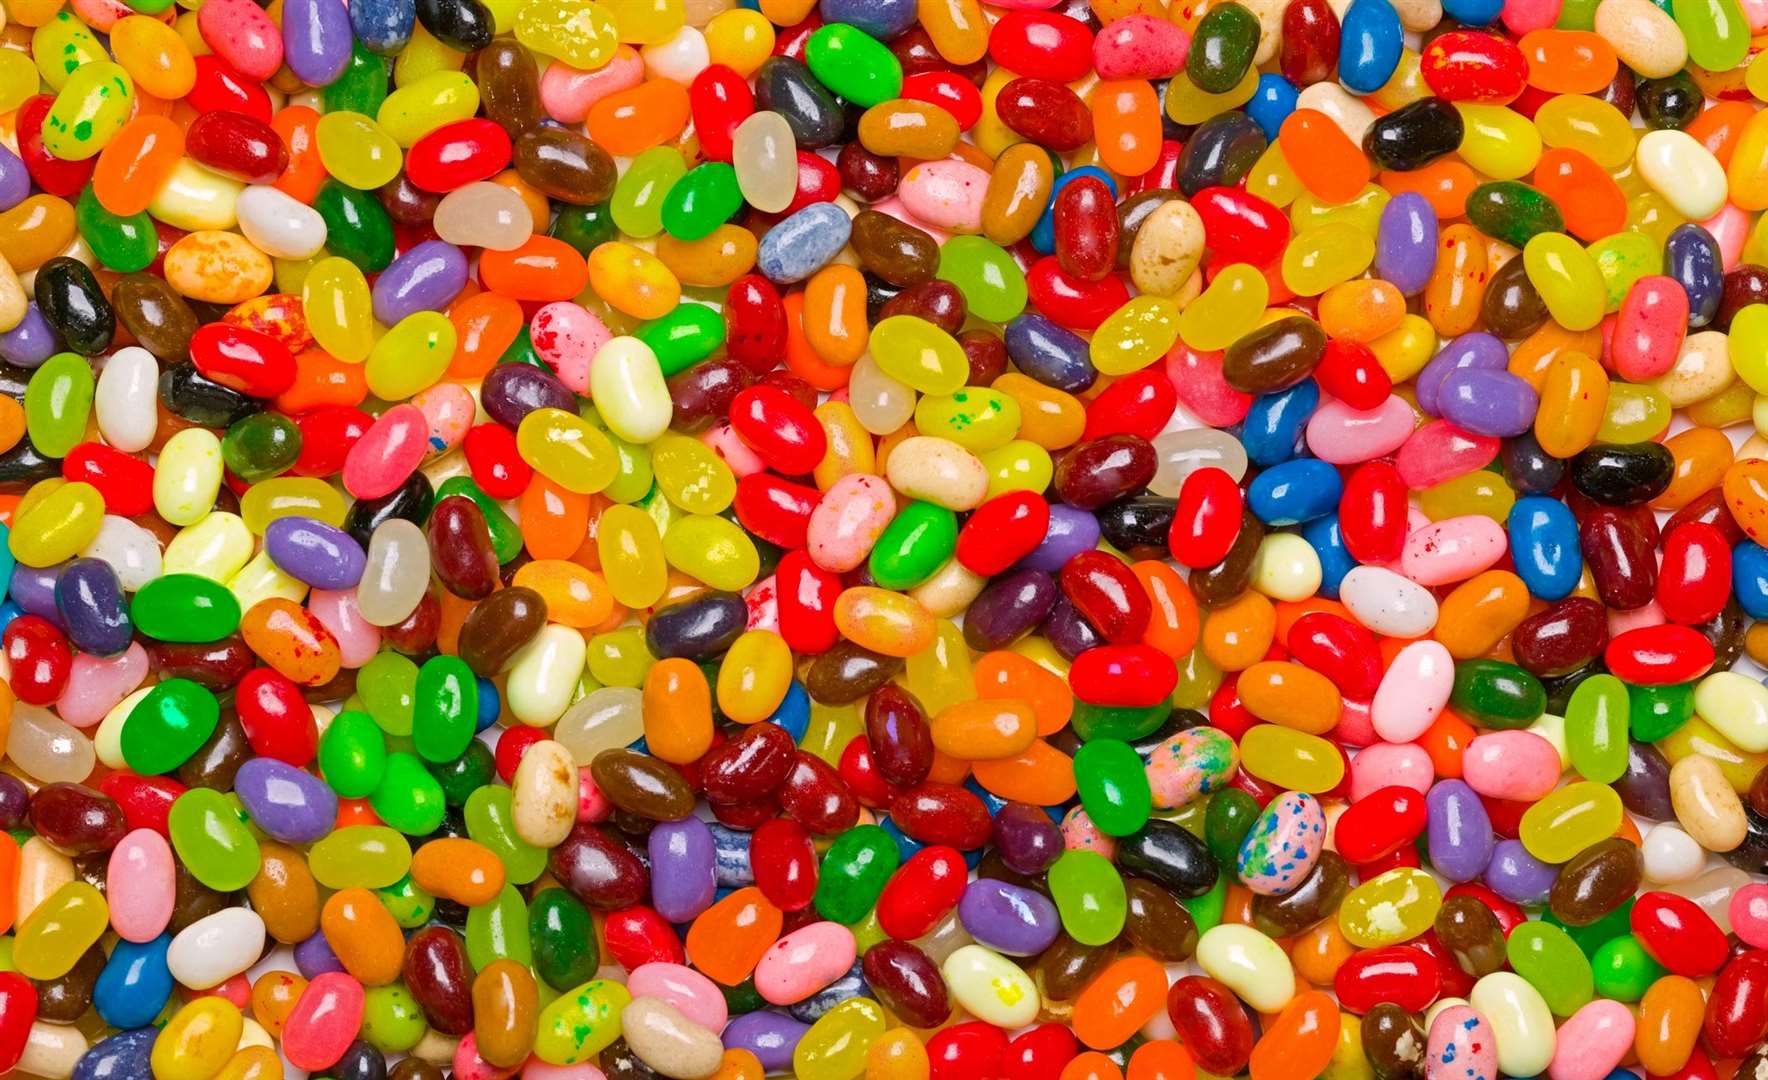 Is the jellybean your top choice? Image: iStock.